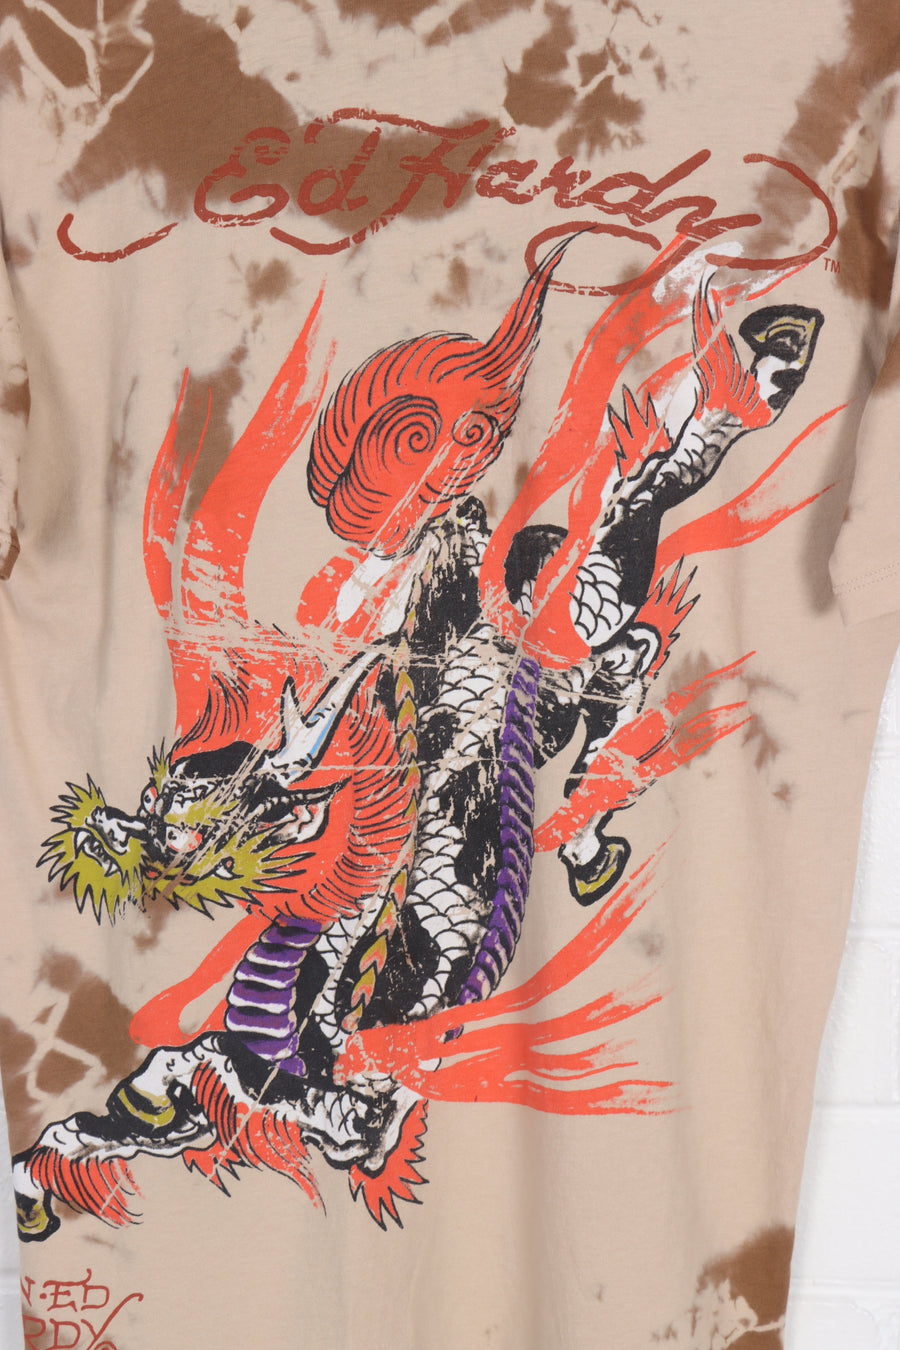 ED HARDY Skull & Dragon Tie-Dye All Over Y2K T-Shirt USA Made (S-M)